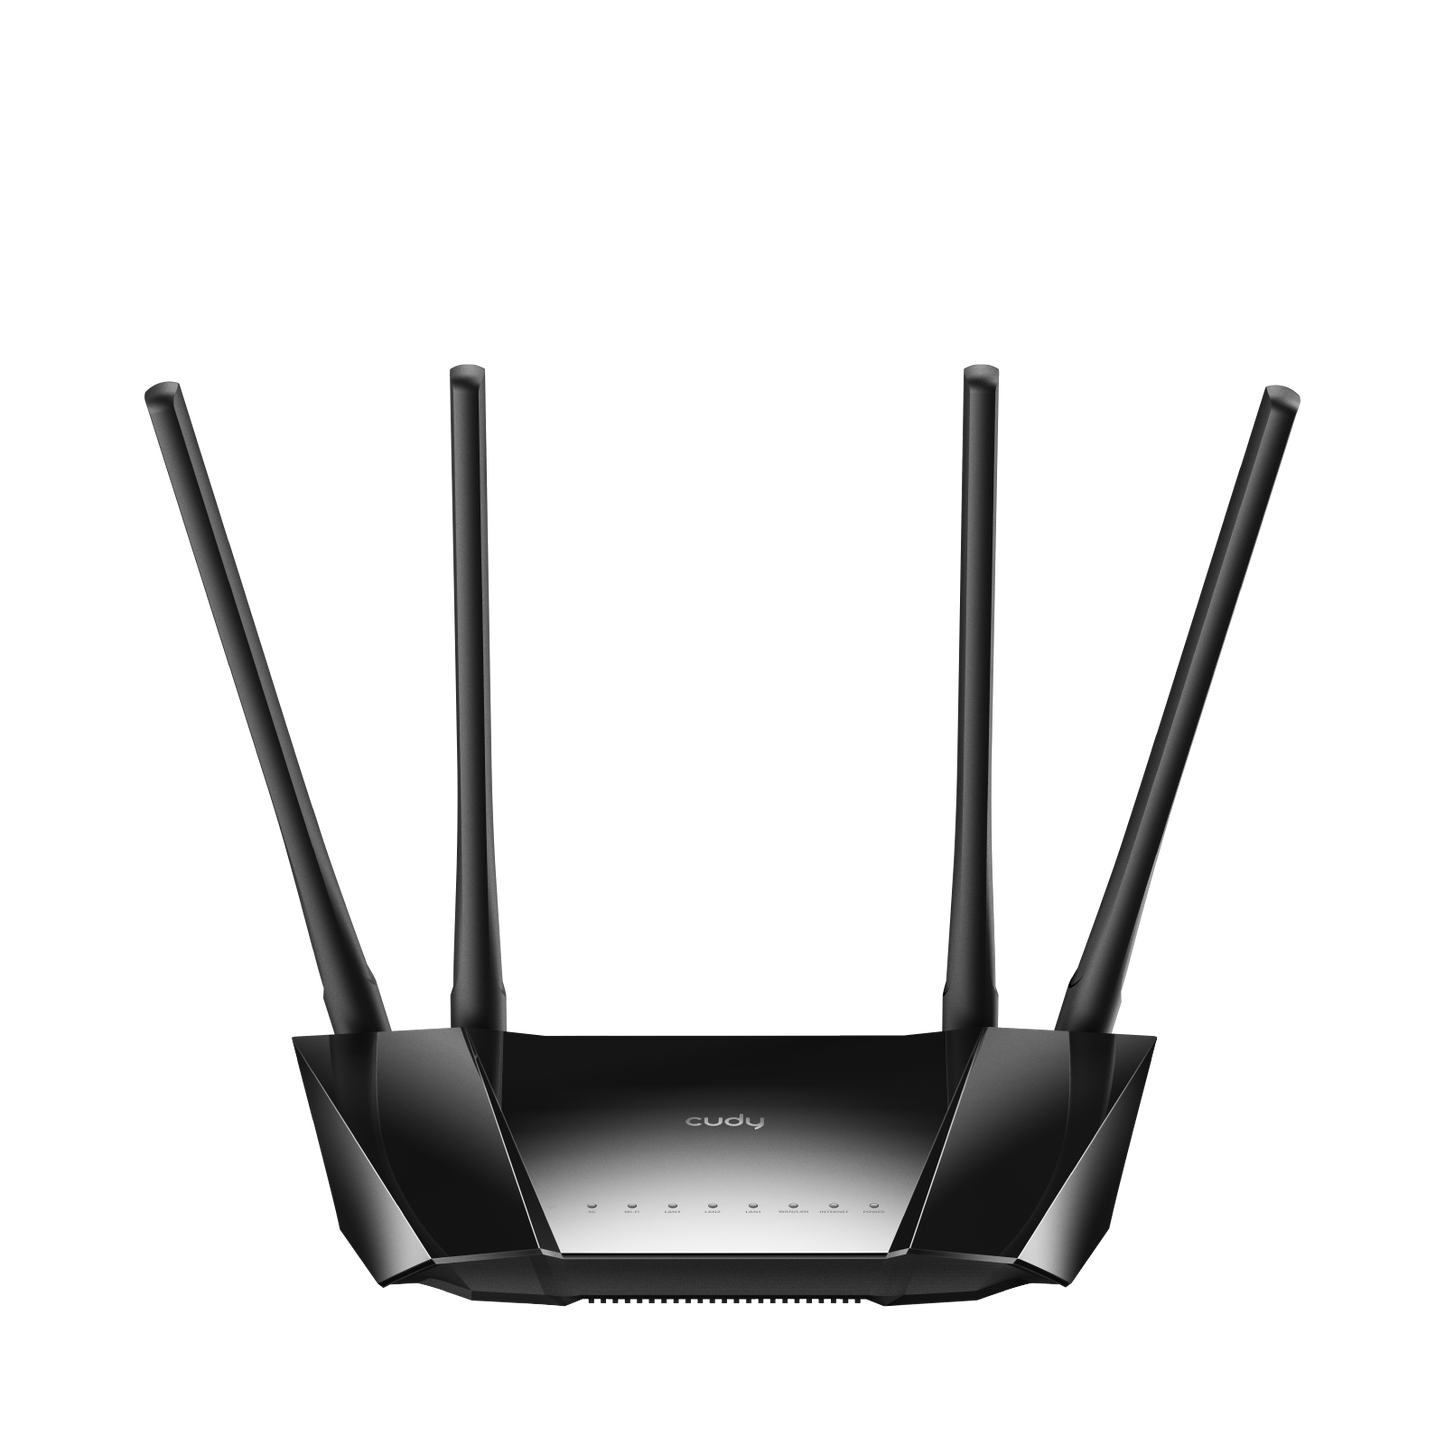 4G N300 Wi-Fi Router, LT400 2.0